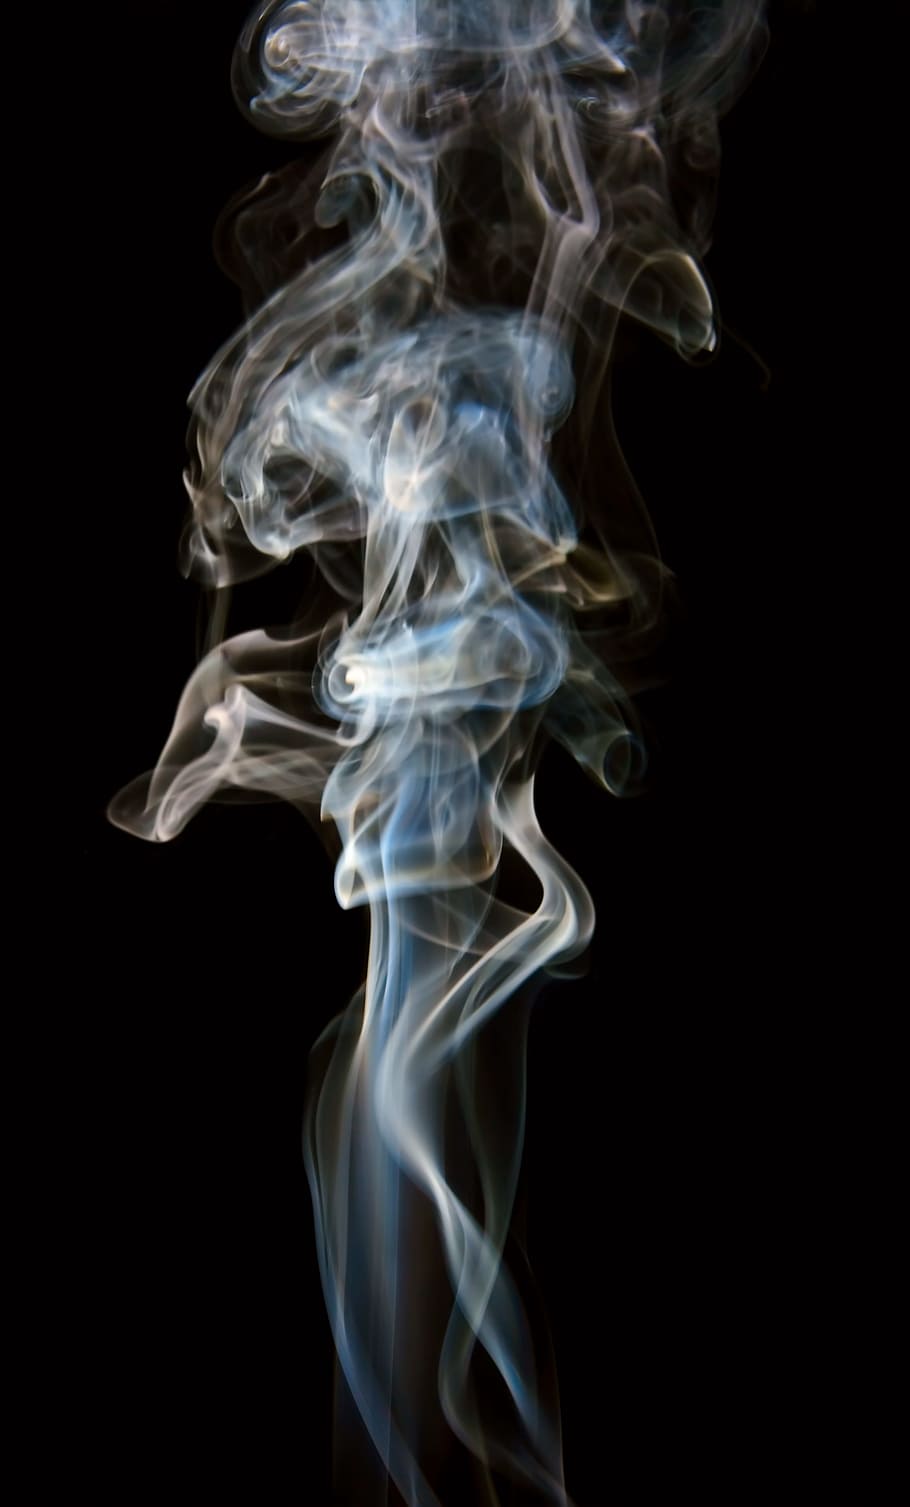 abstract, aroma, aromatherapy, background, color, smell, smoke, studio shot, black background, smoke - physical structure